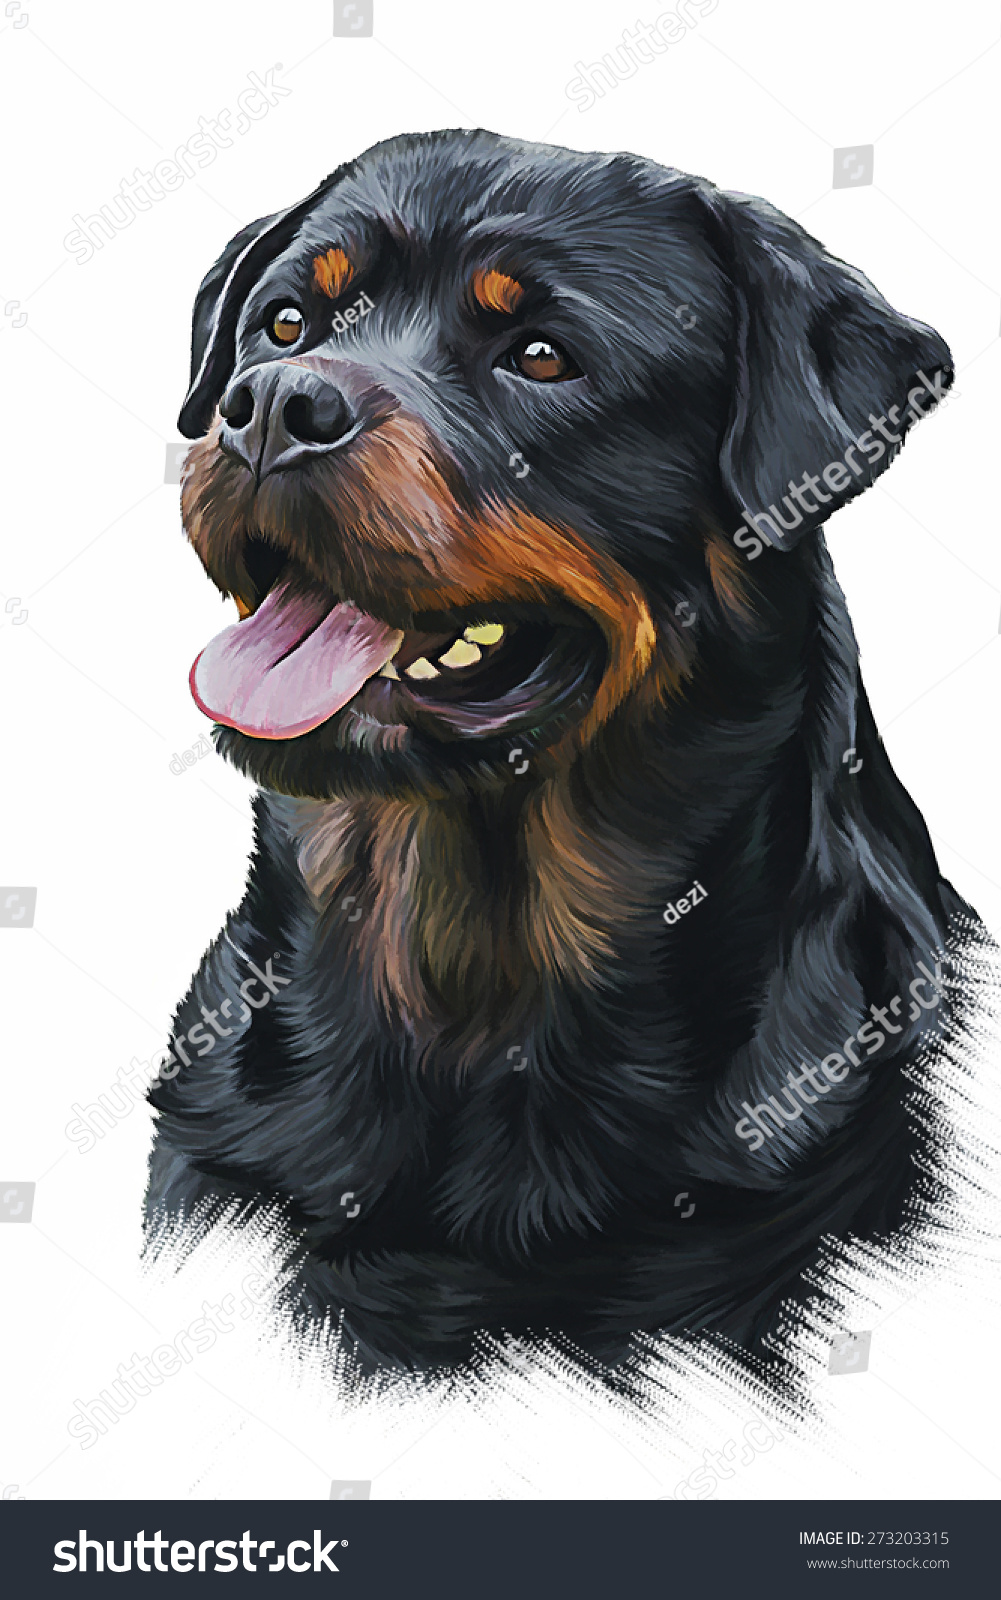 Drawing Of The Dog Rottweiler, Tricolor, Oil Painting On A White